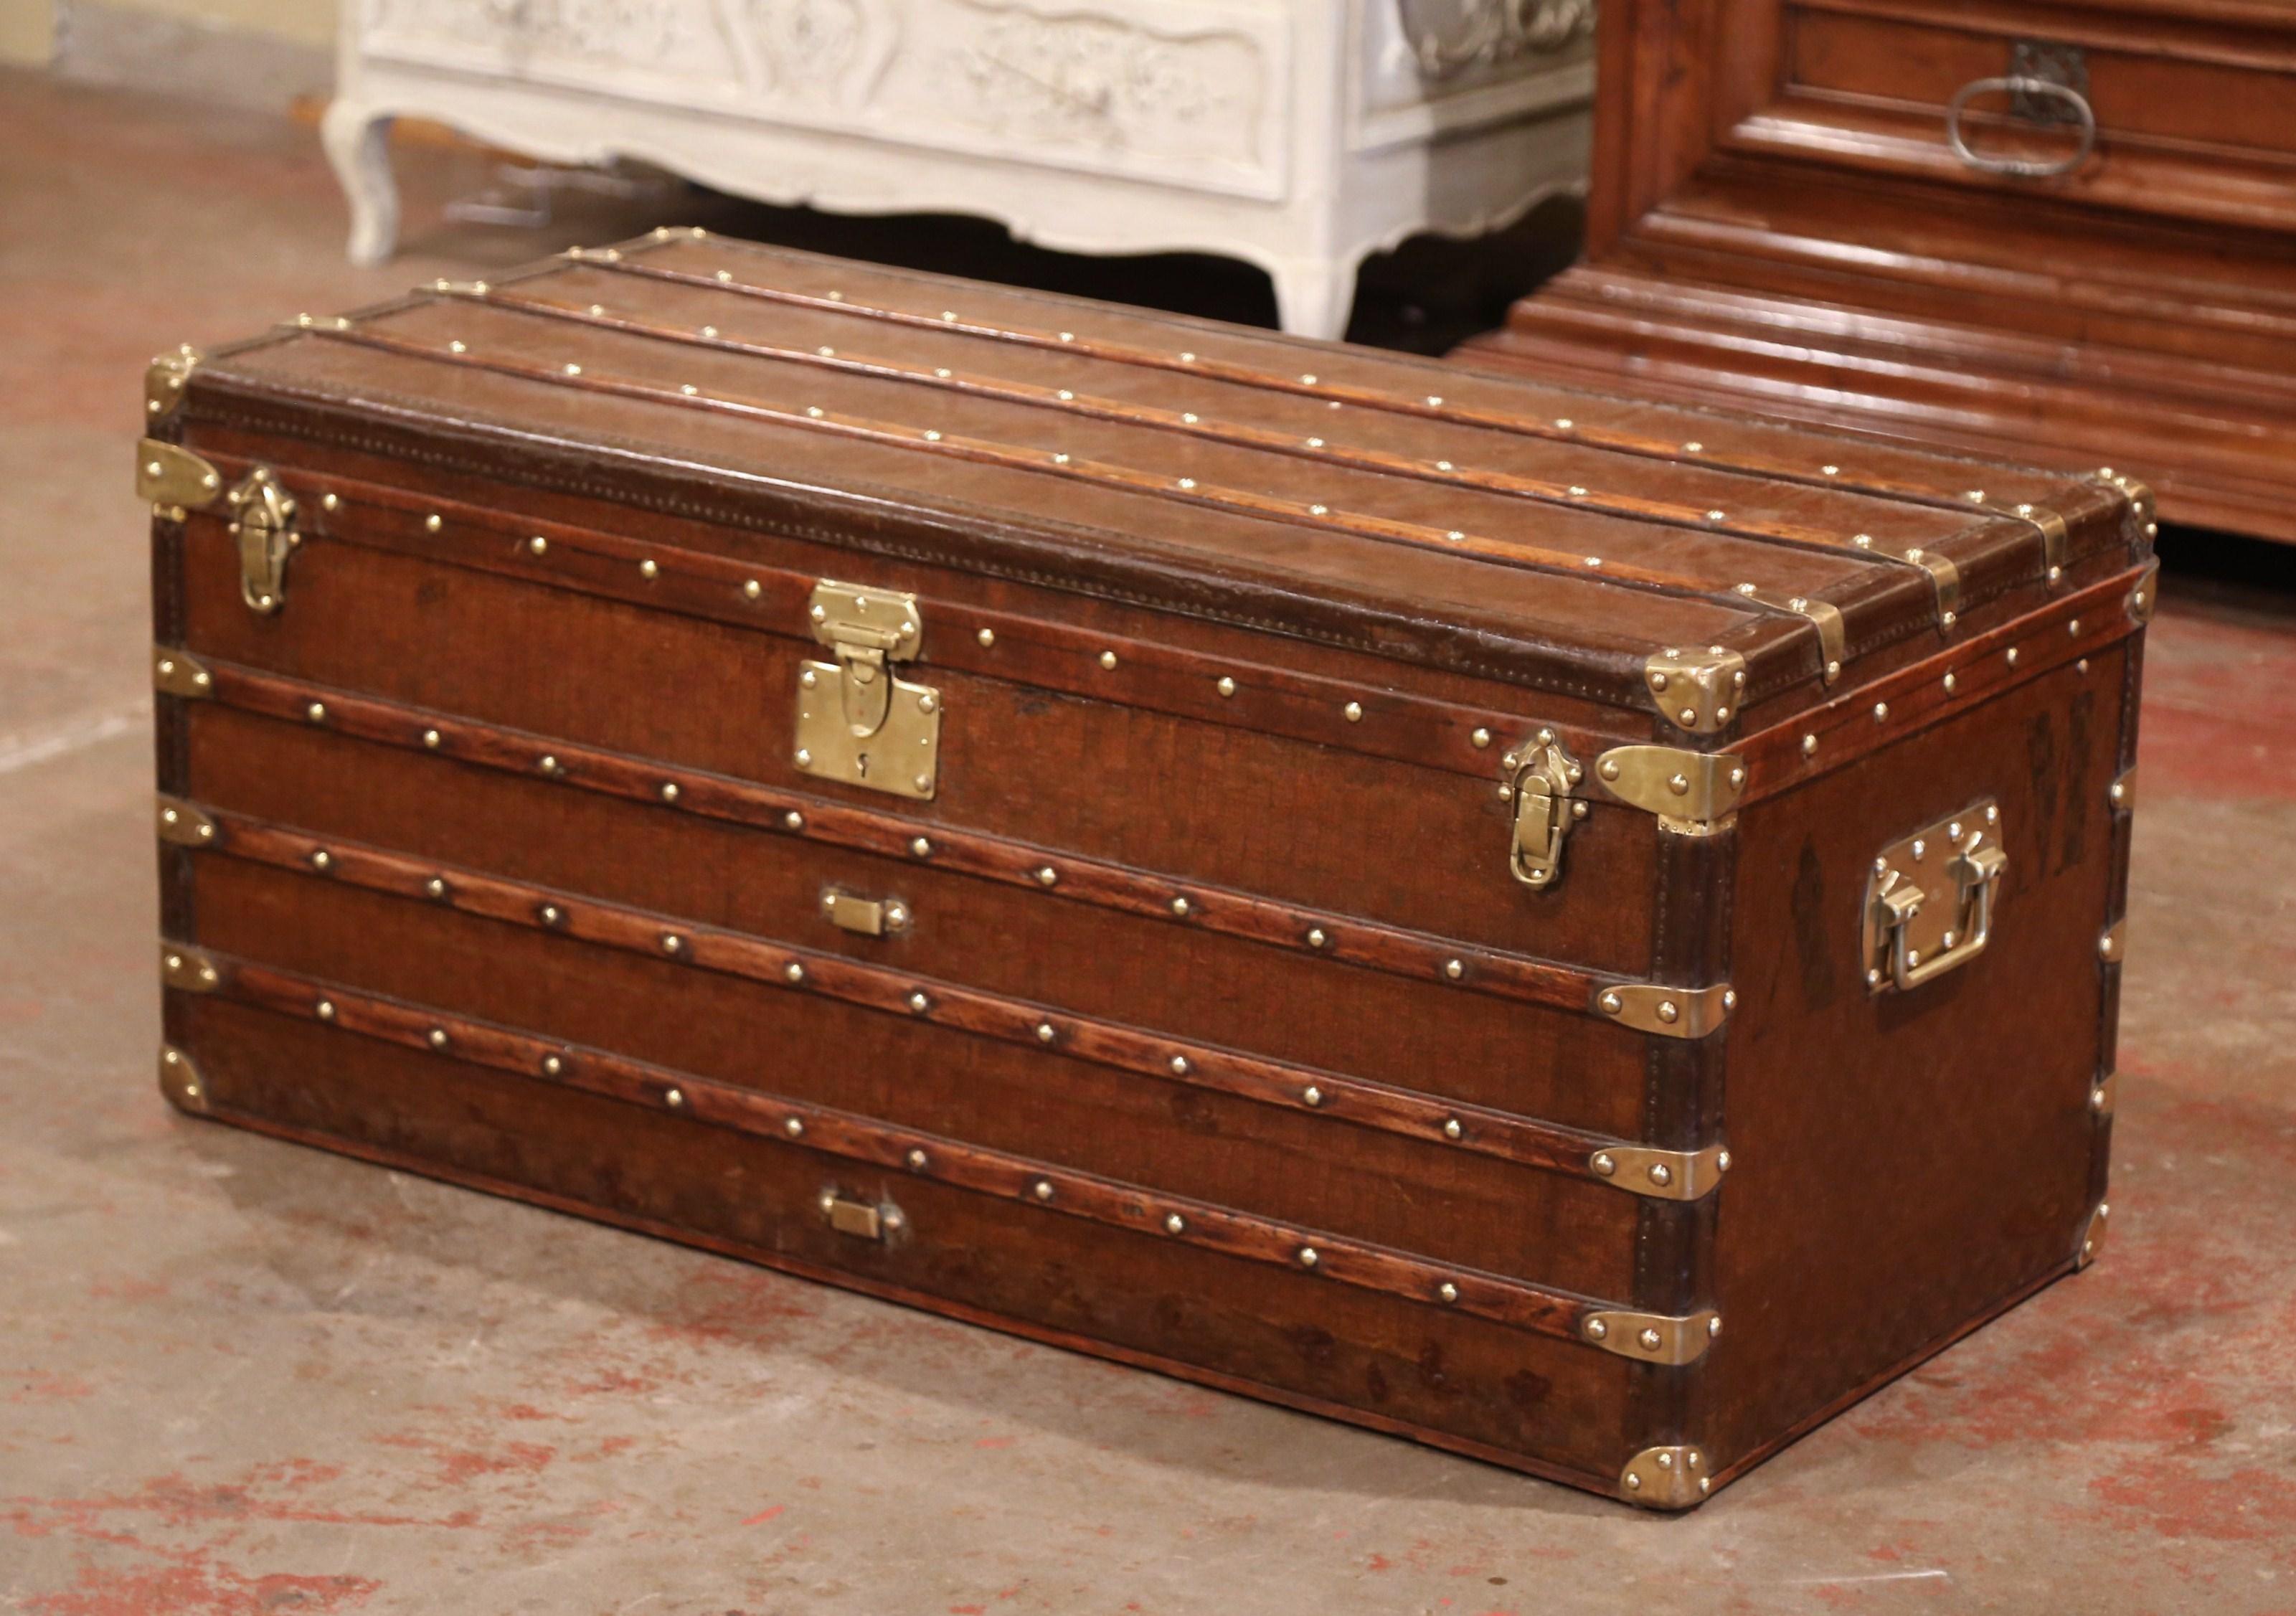 This large trunk would make an elegant coffee or cocktail table! Crafted in Paris circa 1880, the antique trunk is rectangular in shape, and finished on all four sides including the top, it features heavy brass handles with engraving stamp of